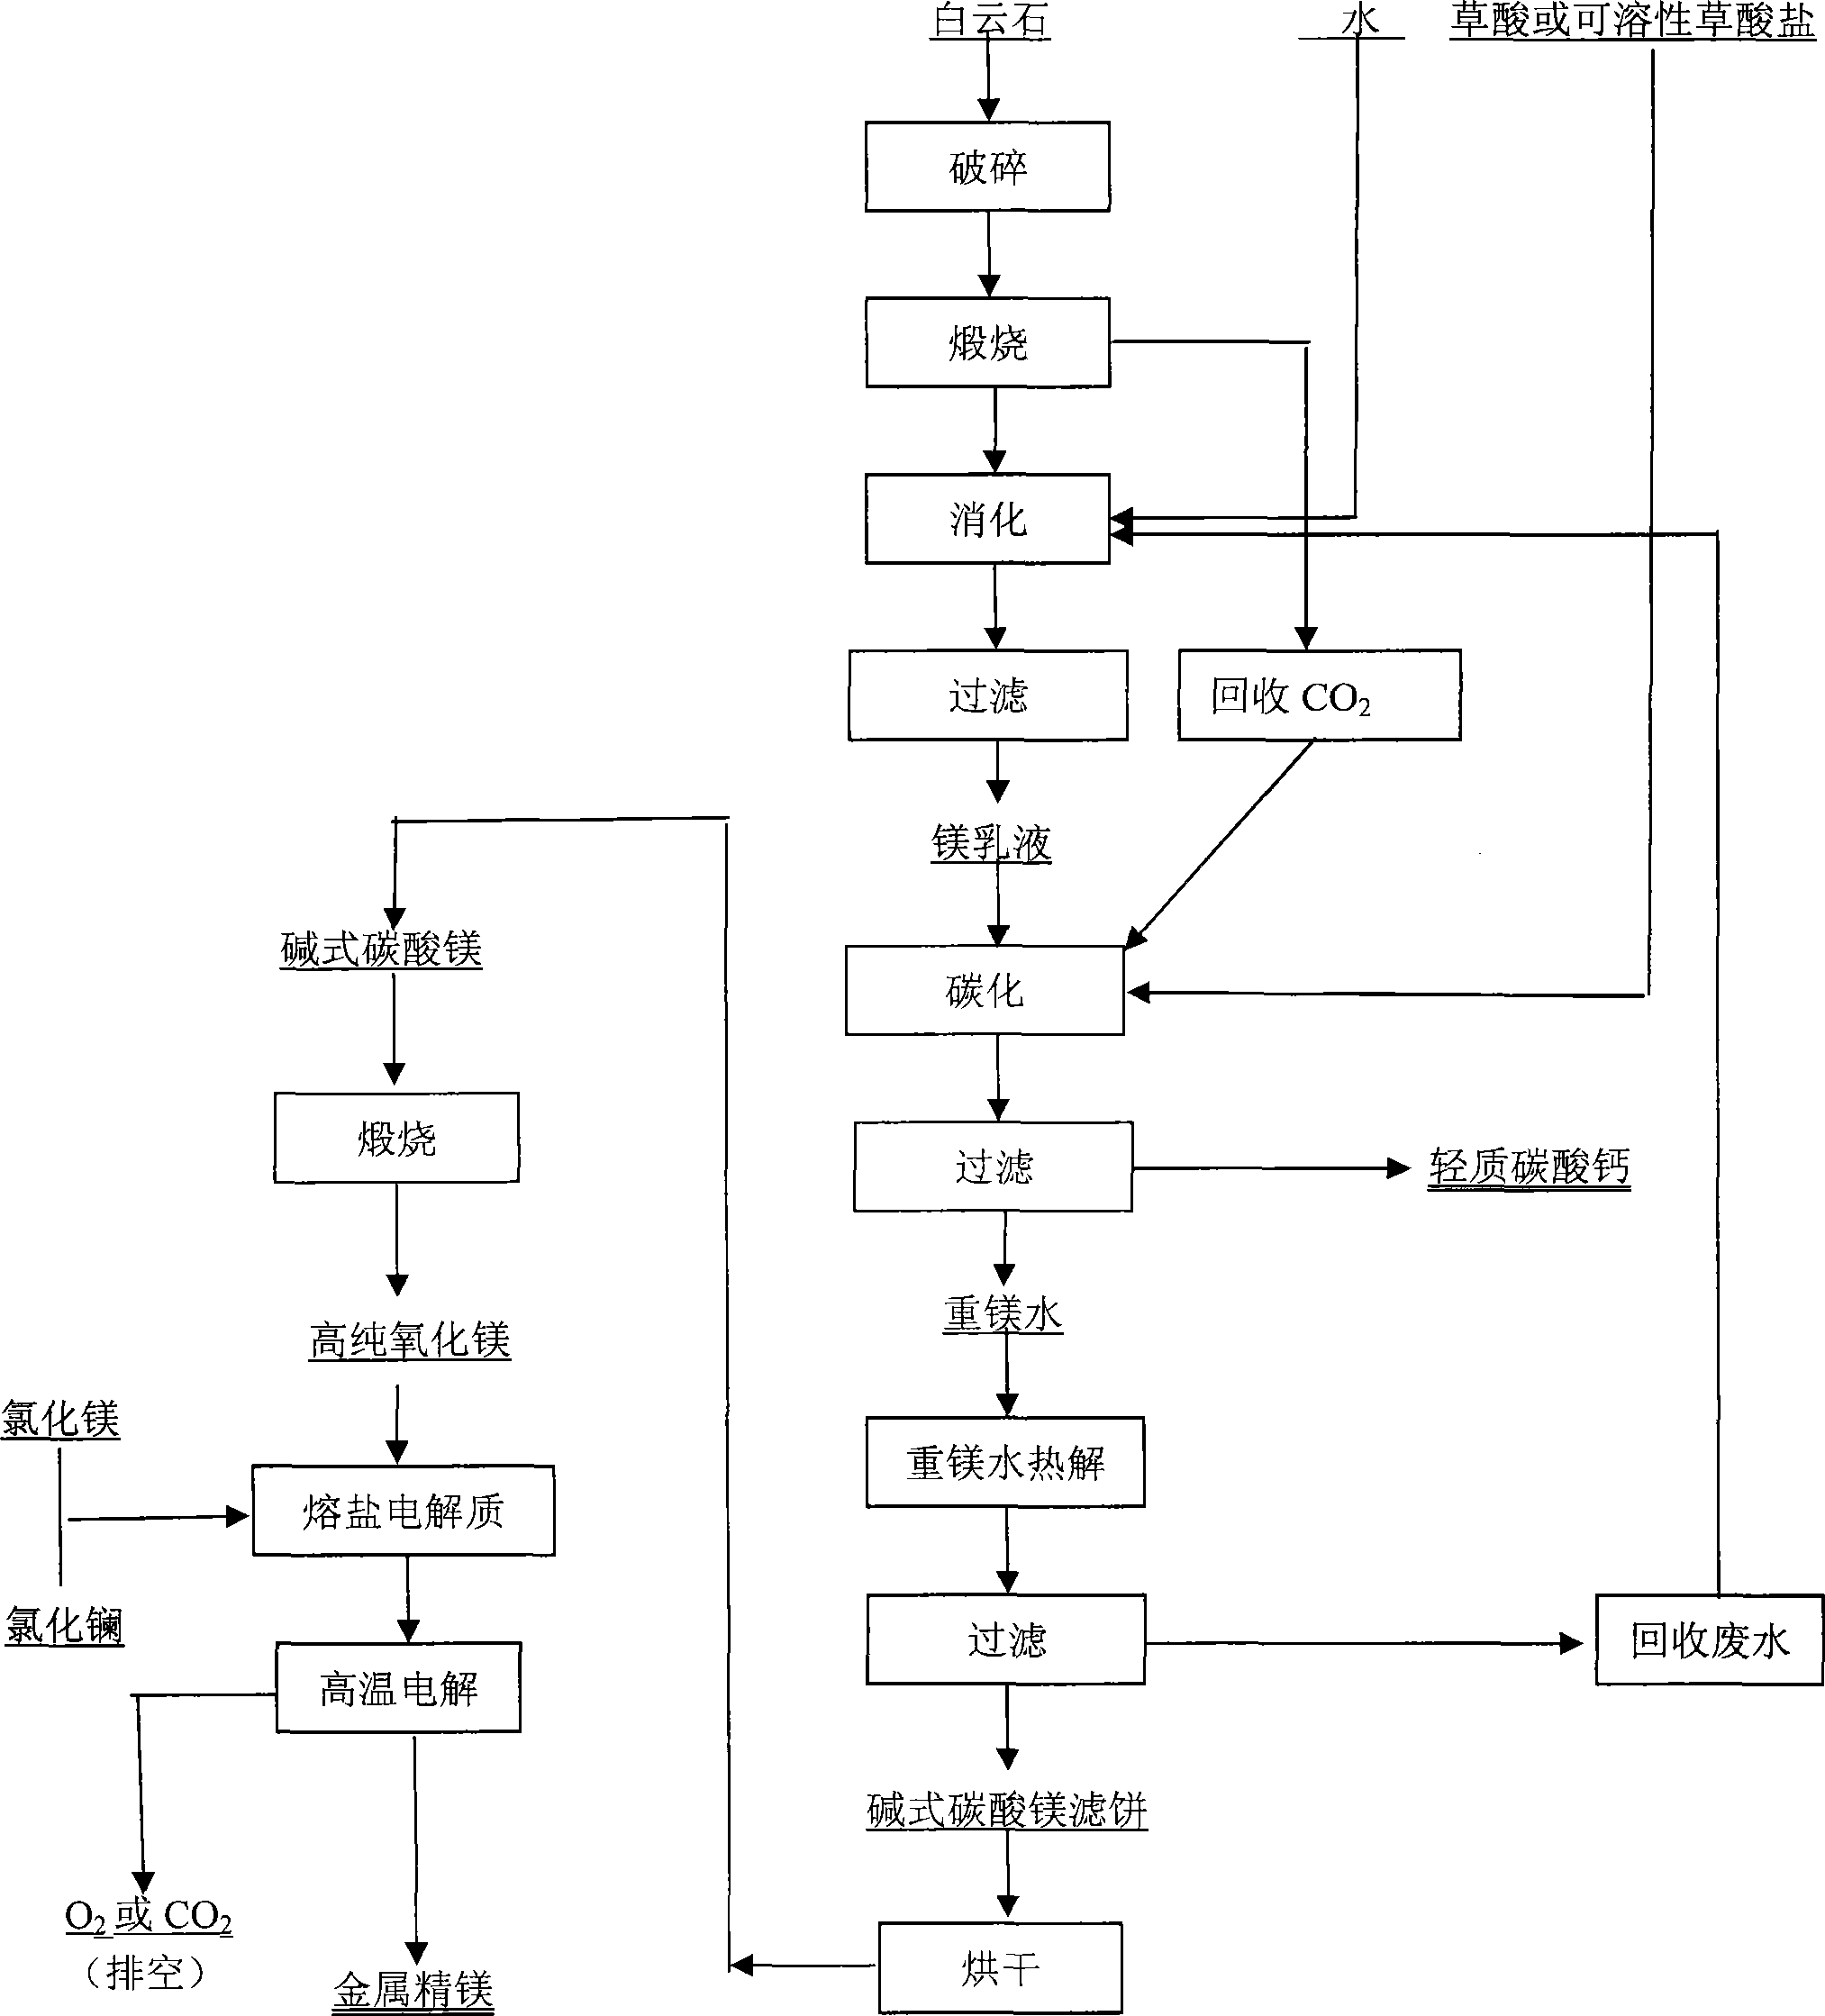 Process method for preparing metal refined magnesium from dolomite